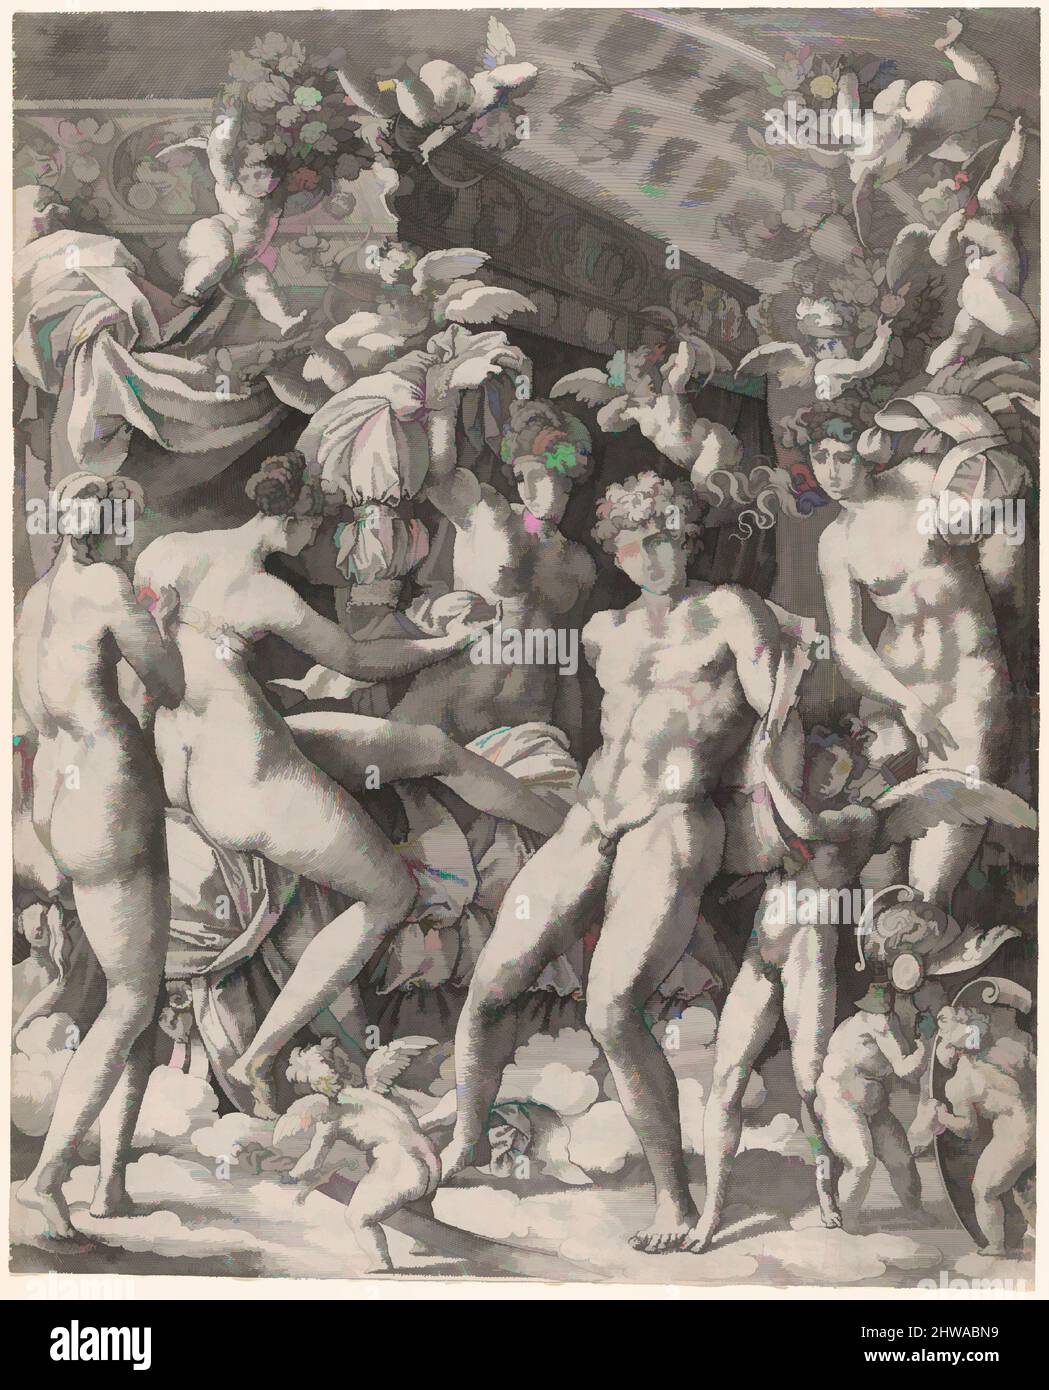 Art inspired by Drawings and Prints, Print, Venus and Mars with cupid and the Three Graces, Formerly attributed to, Giovanni Jacopo Caraglio, Classic works modernized by Artotop with a splash of modernity. Shapes, color and value, eye-catching visual impact on art. Emotions through freedom of artworks in a contemporary way. A timeless message pursuing a wildly creative new direction. Artists turning to the digital medium and creating the Artotop NFT Stock Photo